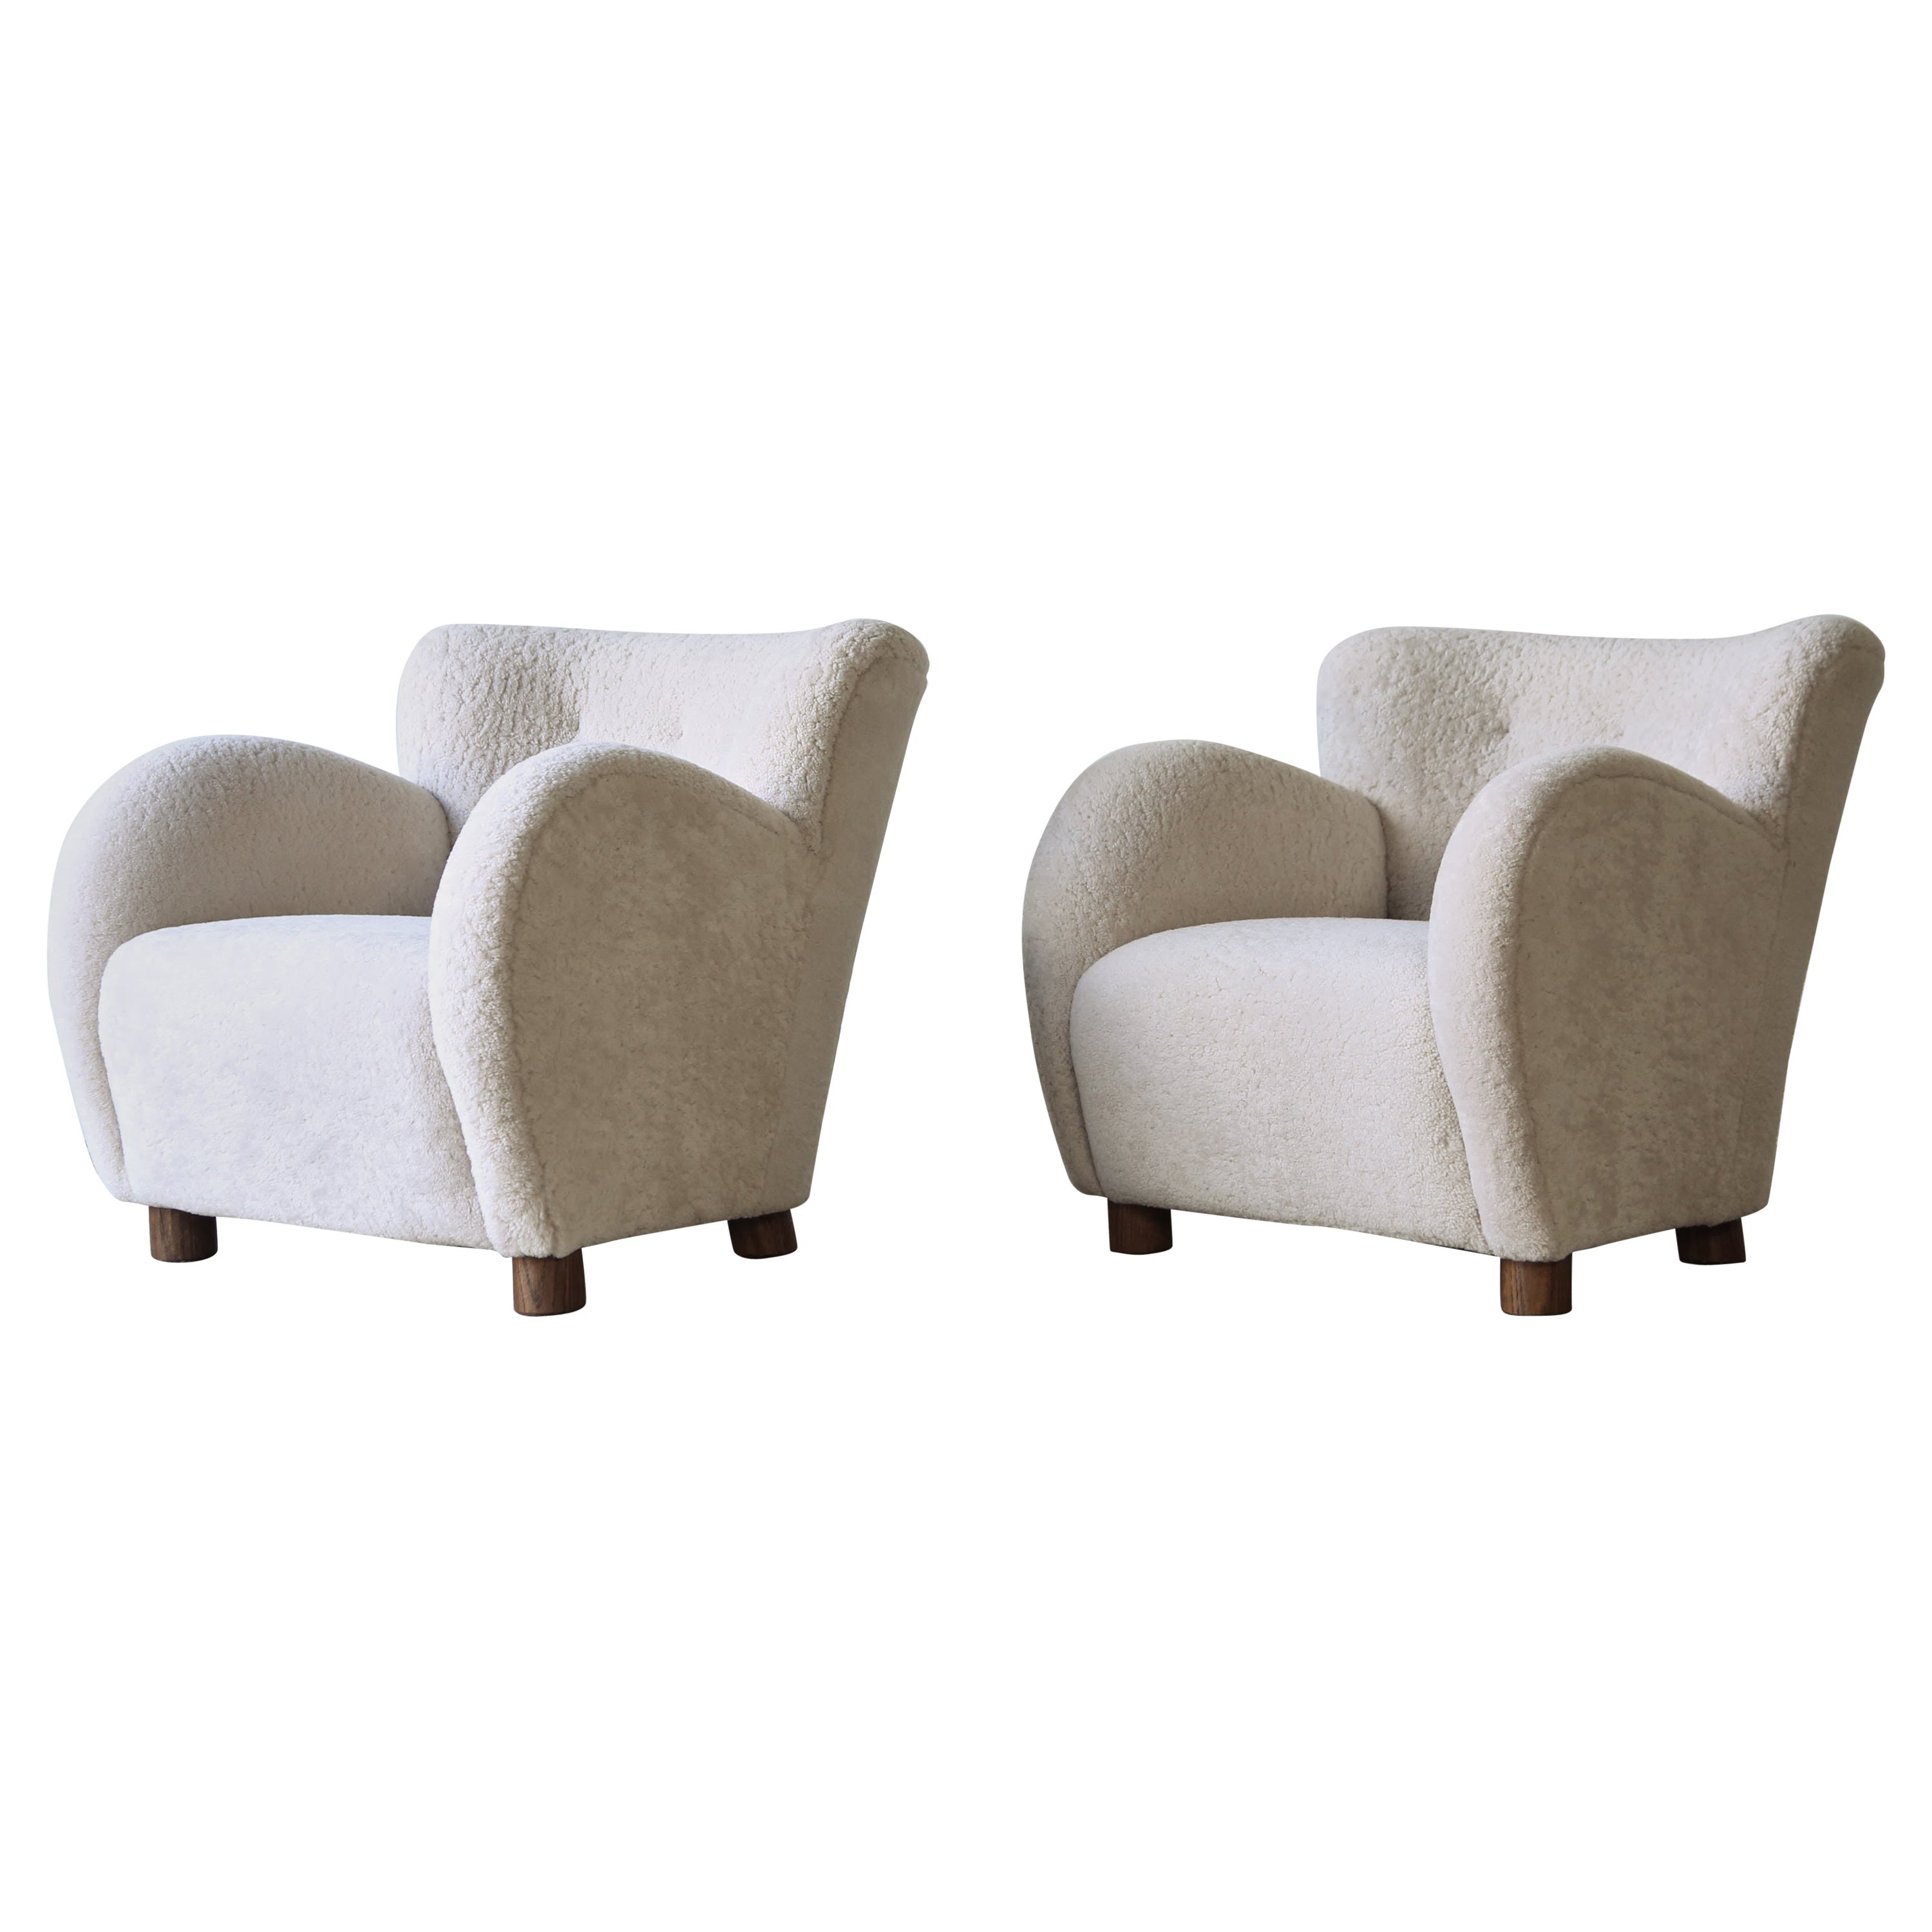 Superb Pair of Lounge Chairs, Upholstered in Natural Sheepskin For Sale